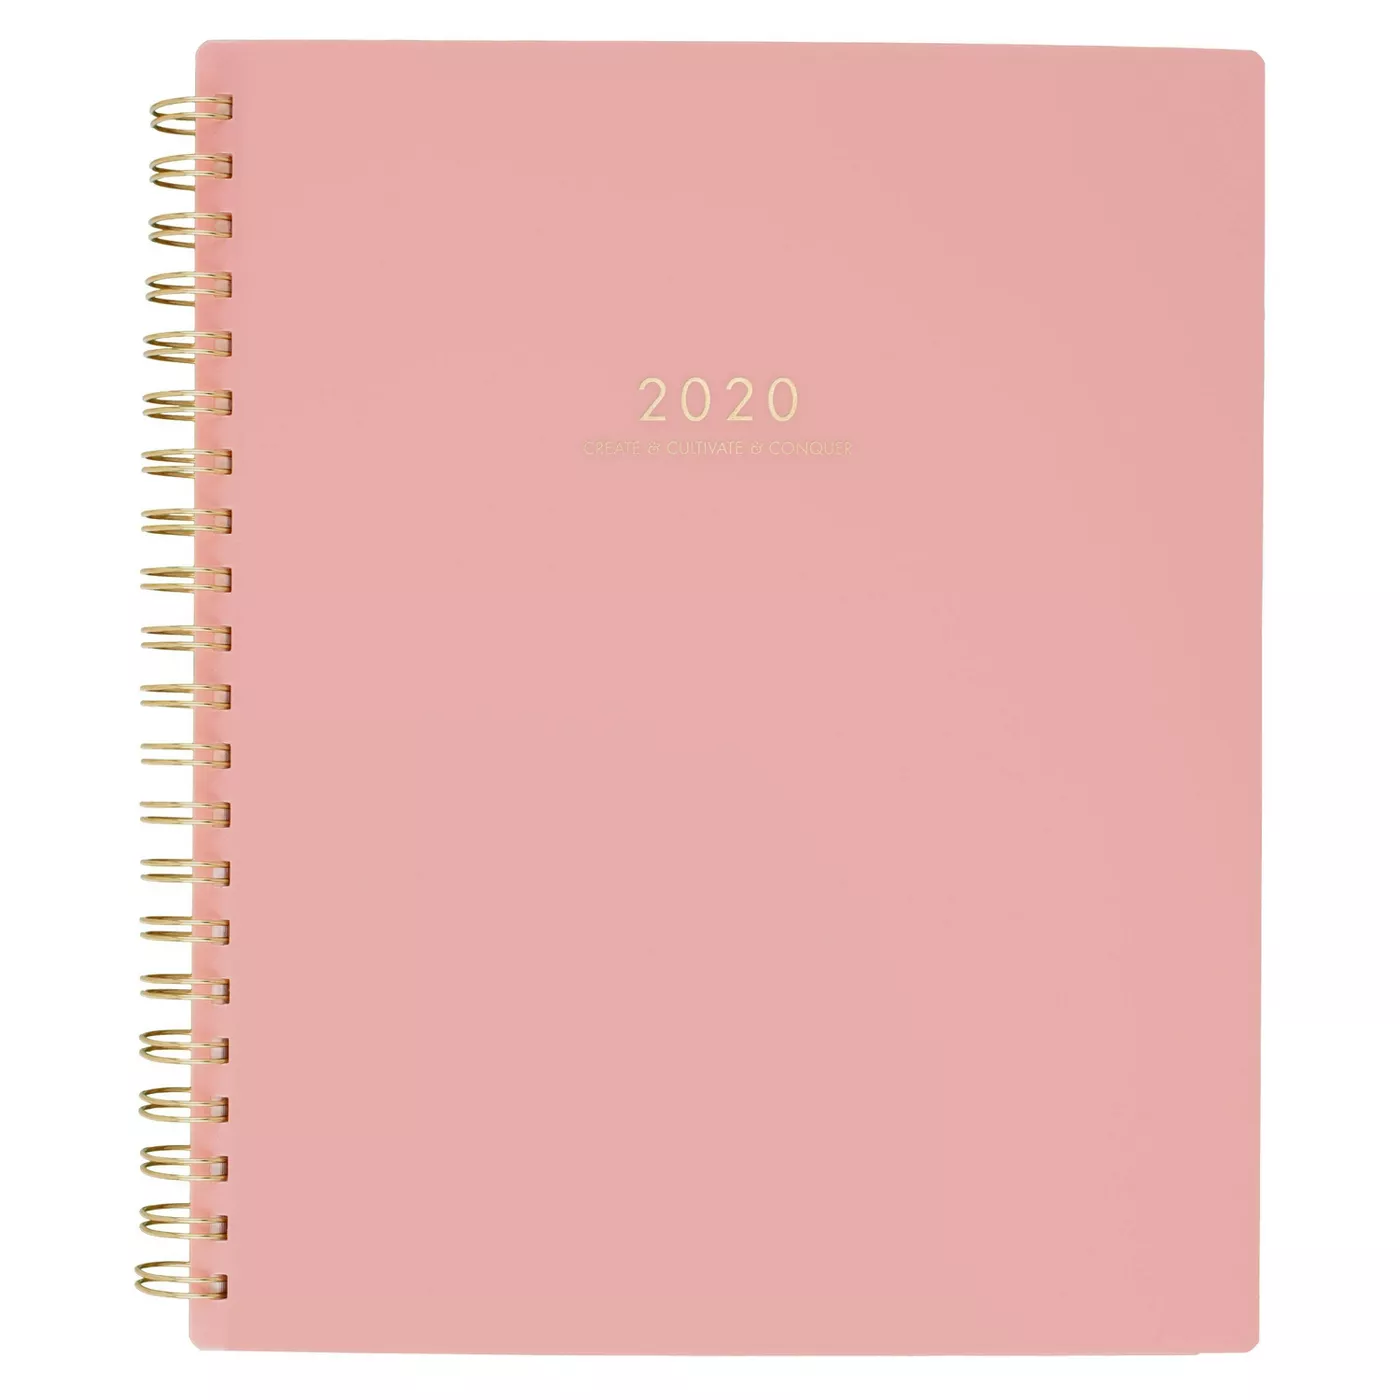 2020 planner for college students, working women or bloggers. 